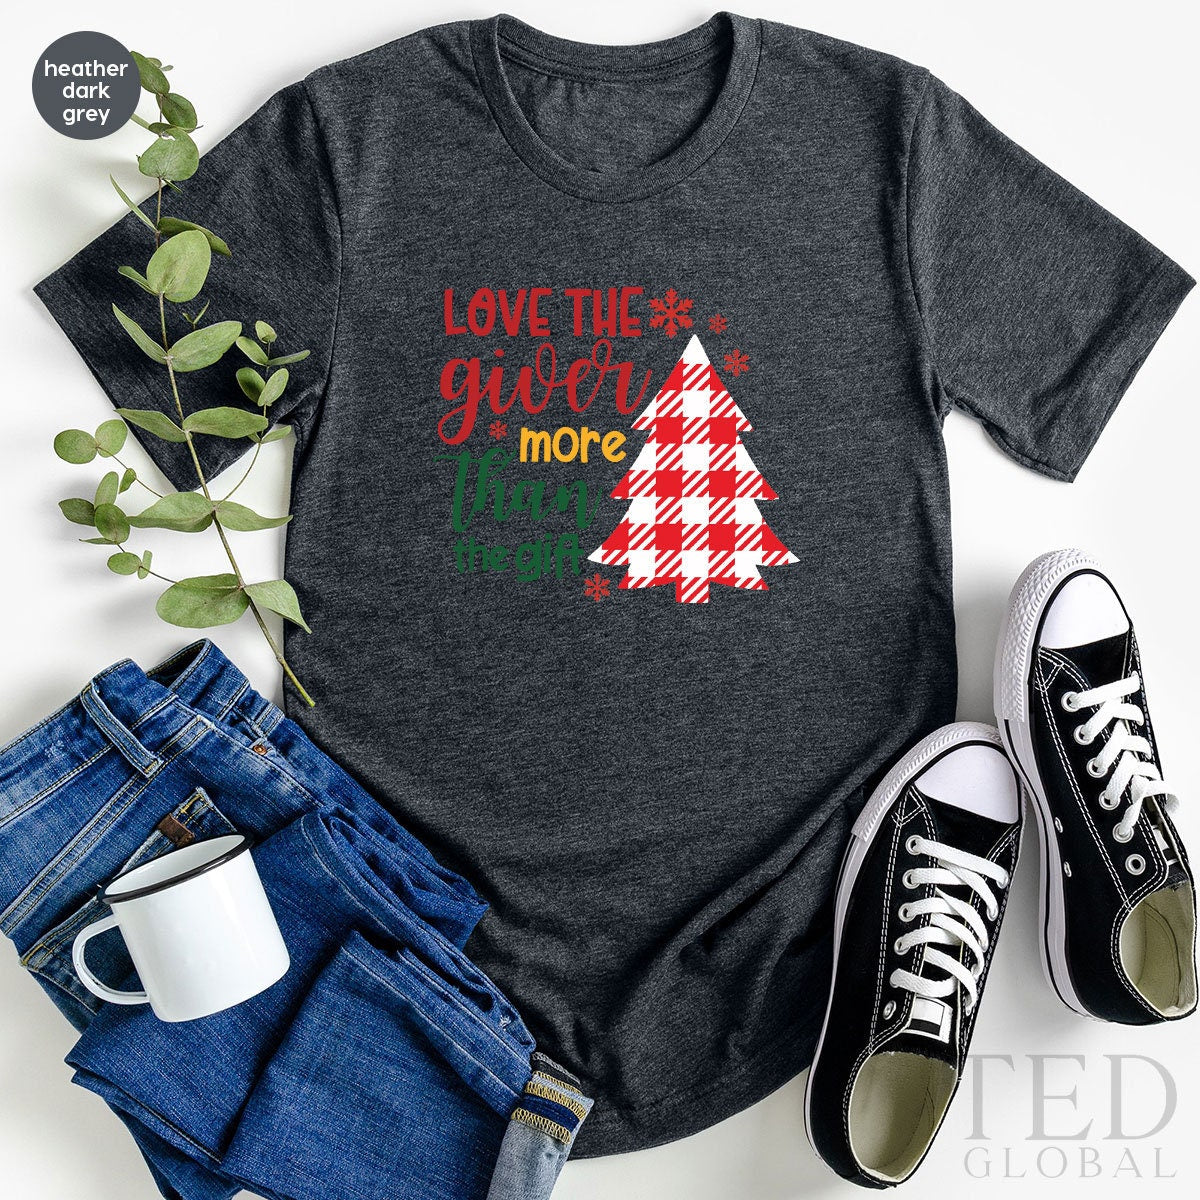 Cookie Funny Ba Official Shirts, Baking Cute Taster – Christmas T-Shirt,